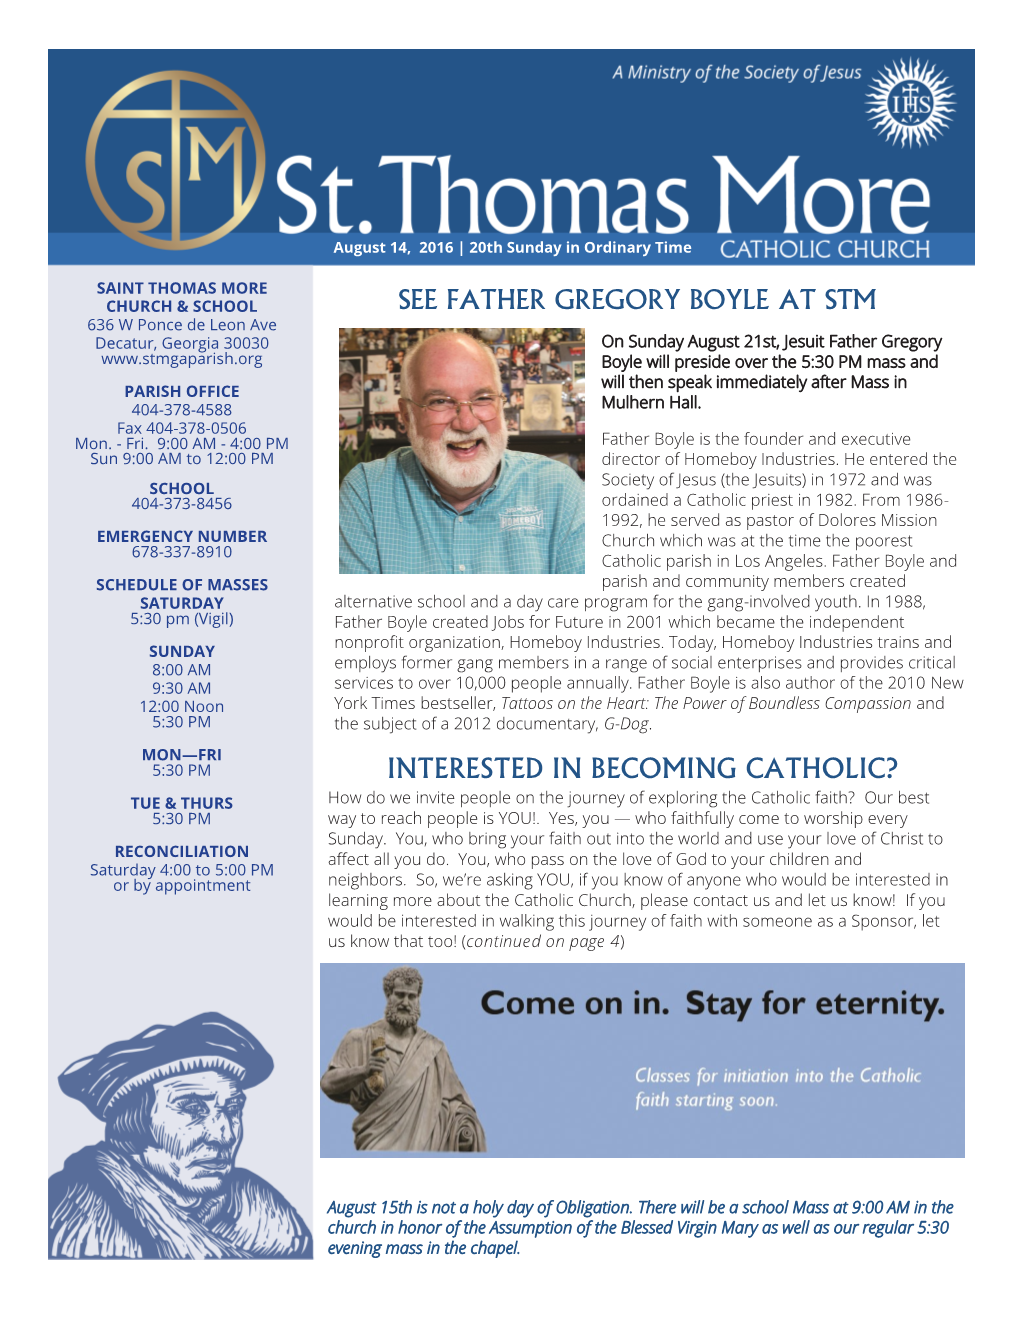 See Father Gregory Boyle at Stm Interested in Becoming Catholic?